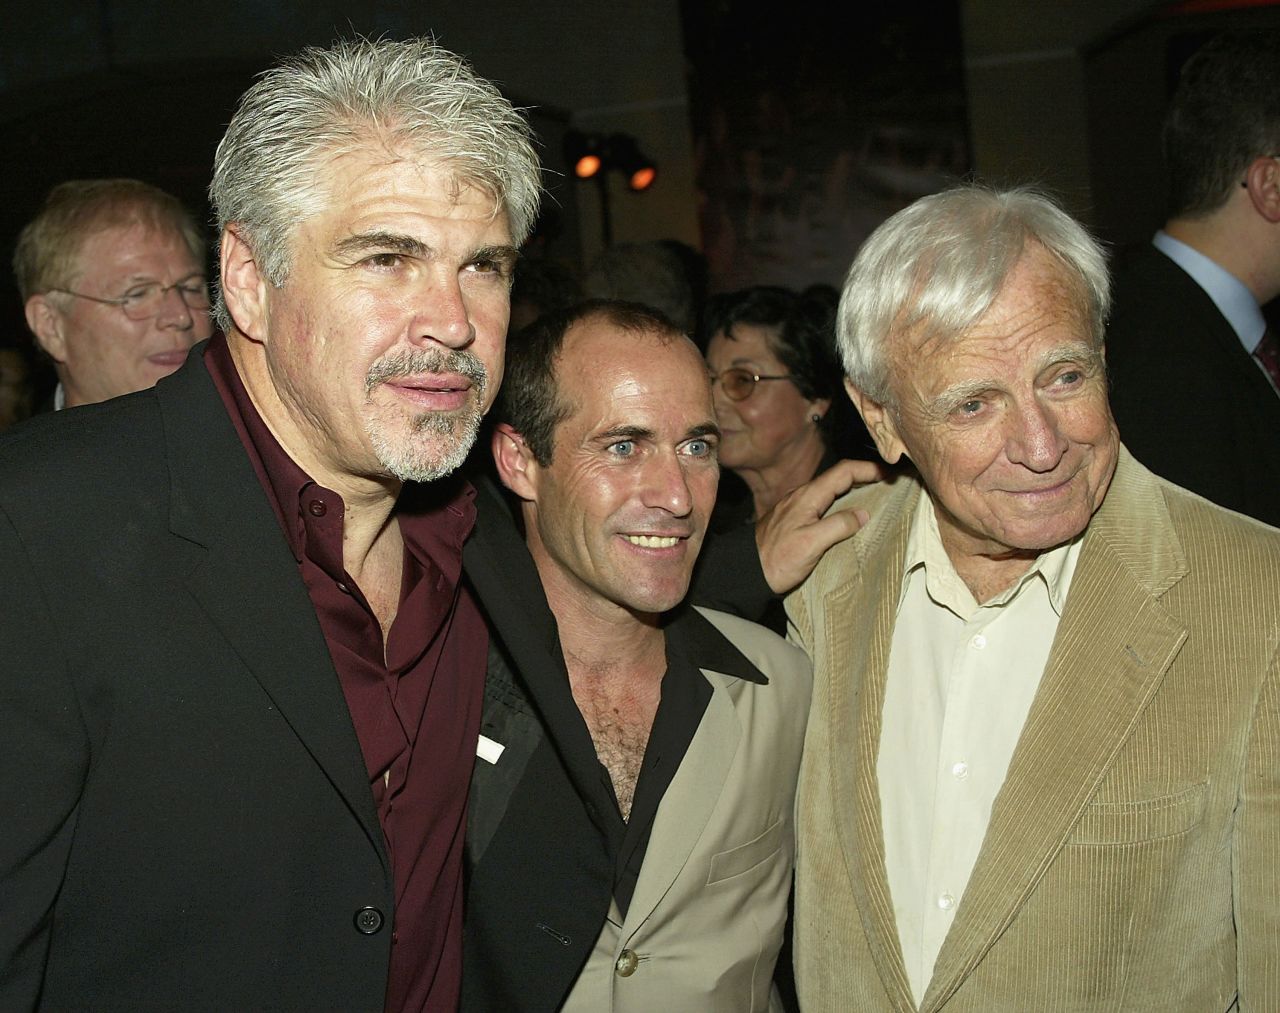 While still riding, Stevens went into acting, teaming up with Gary Ross (left), director of the 2003 film "Seabiscuit," and son of acclaimed screenwriter Arthur Ross (right).